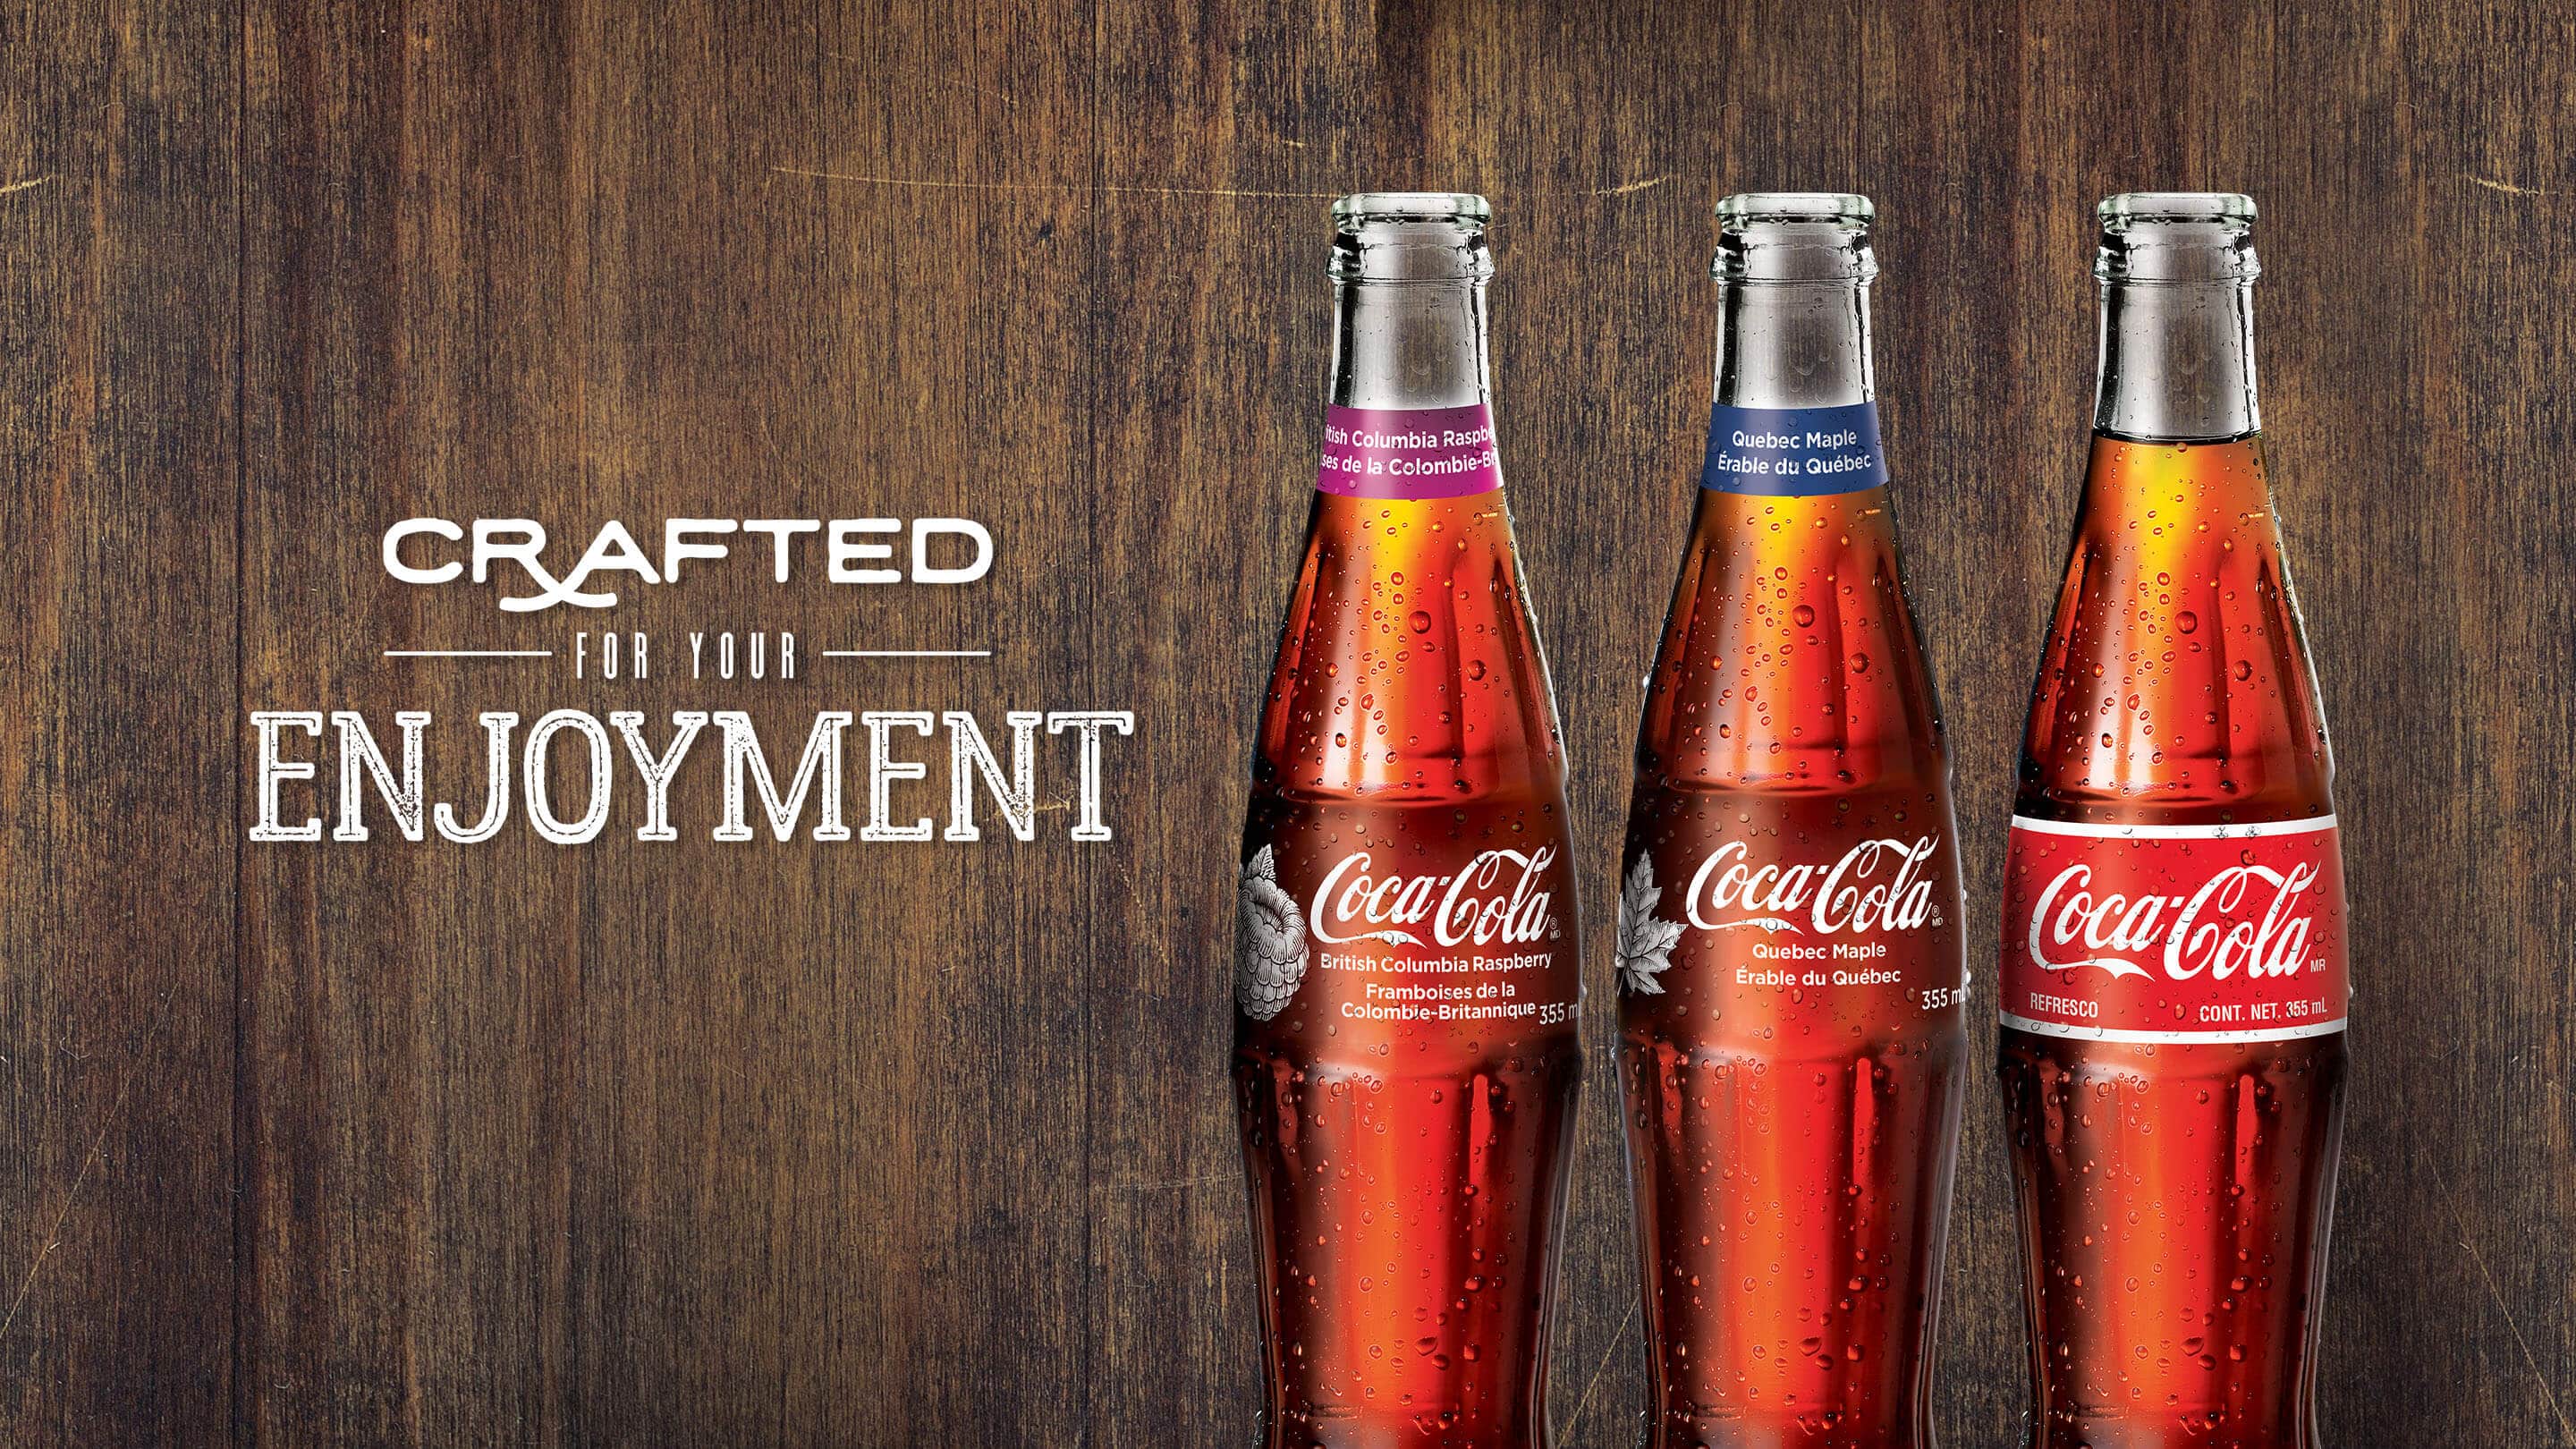 Coca-Cola Specialty Sodas. Crafted for your enjoyment.